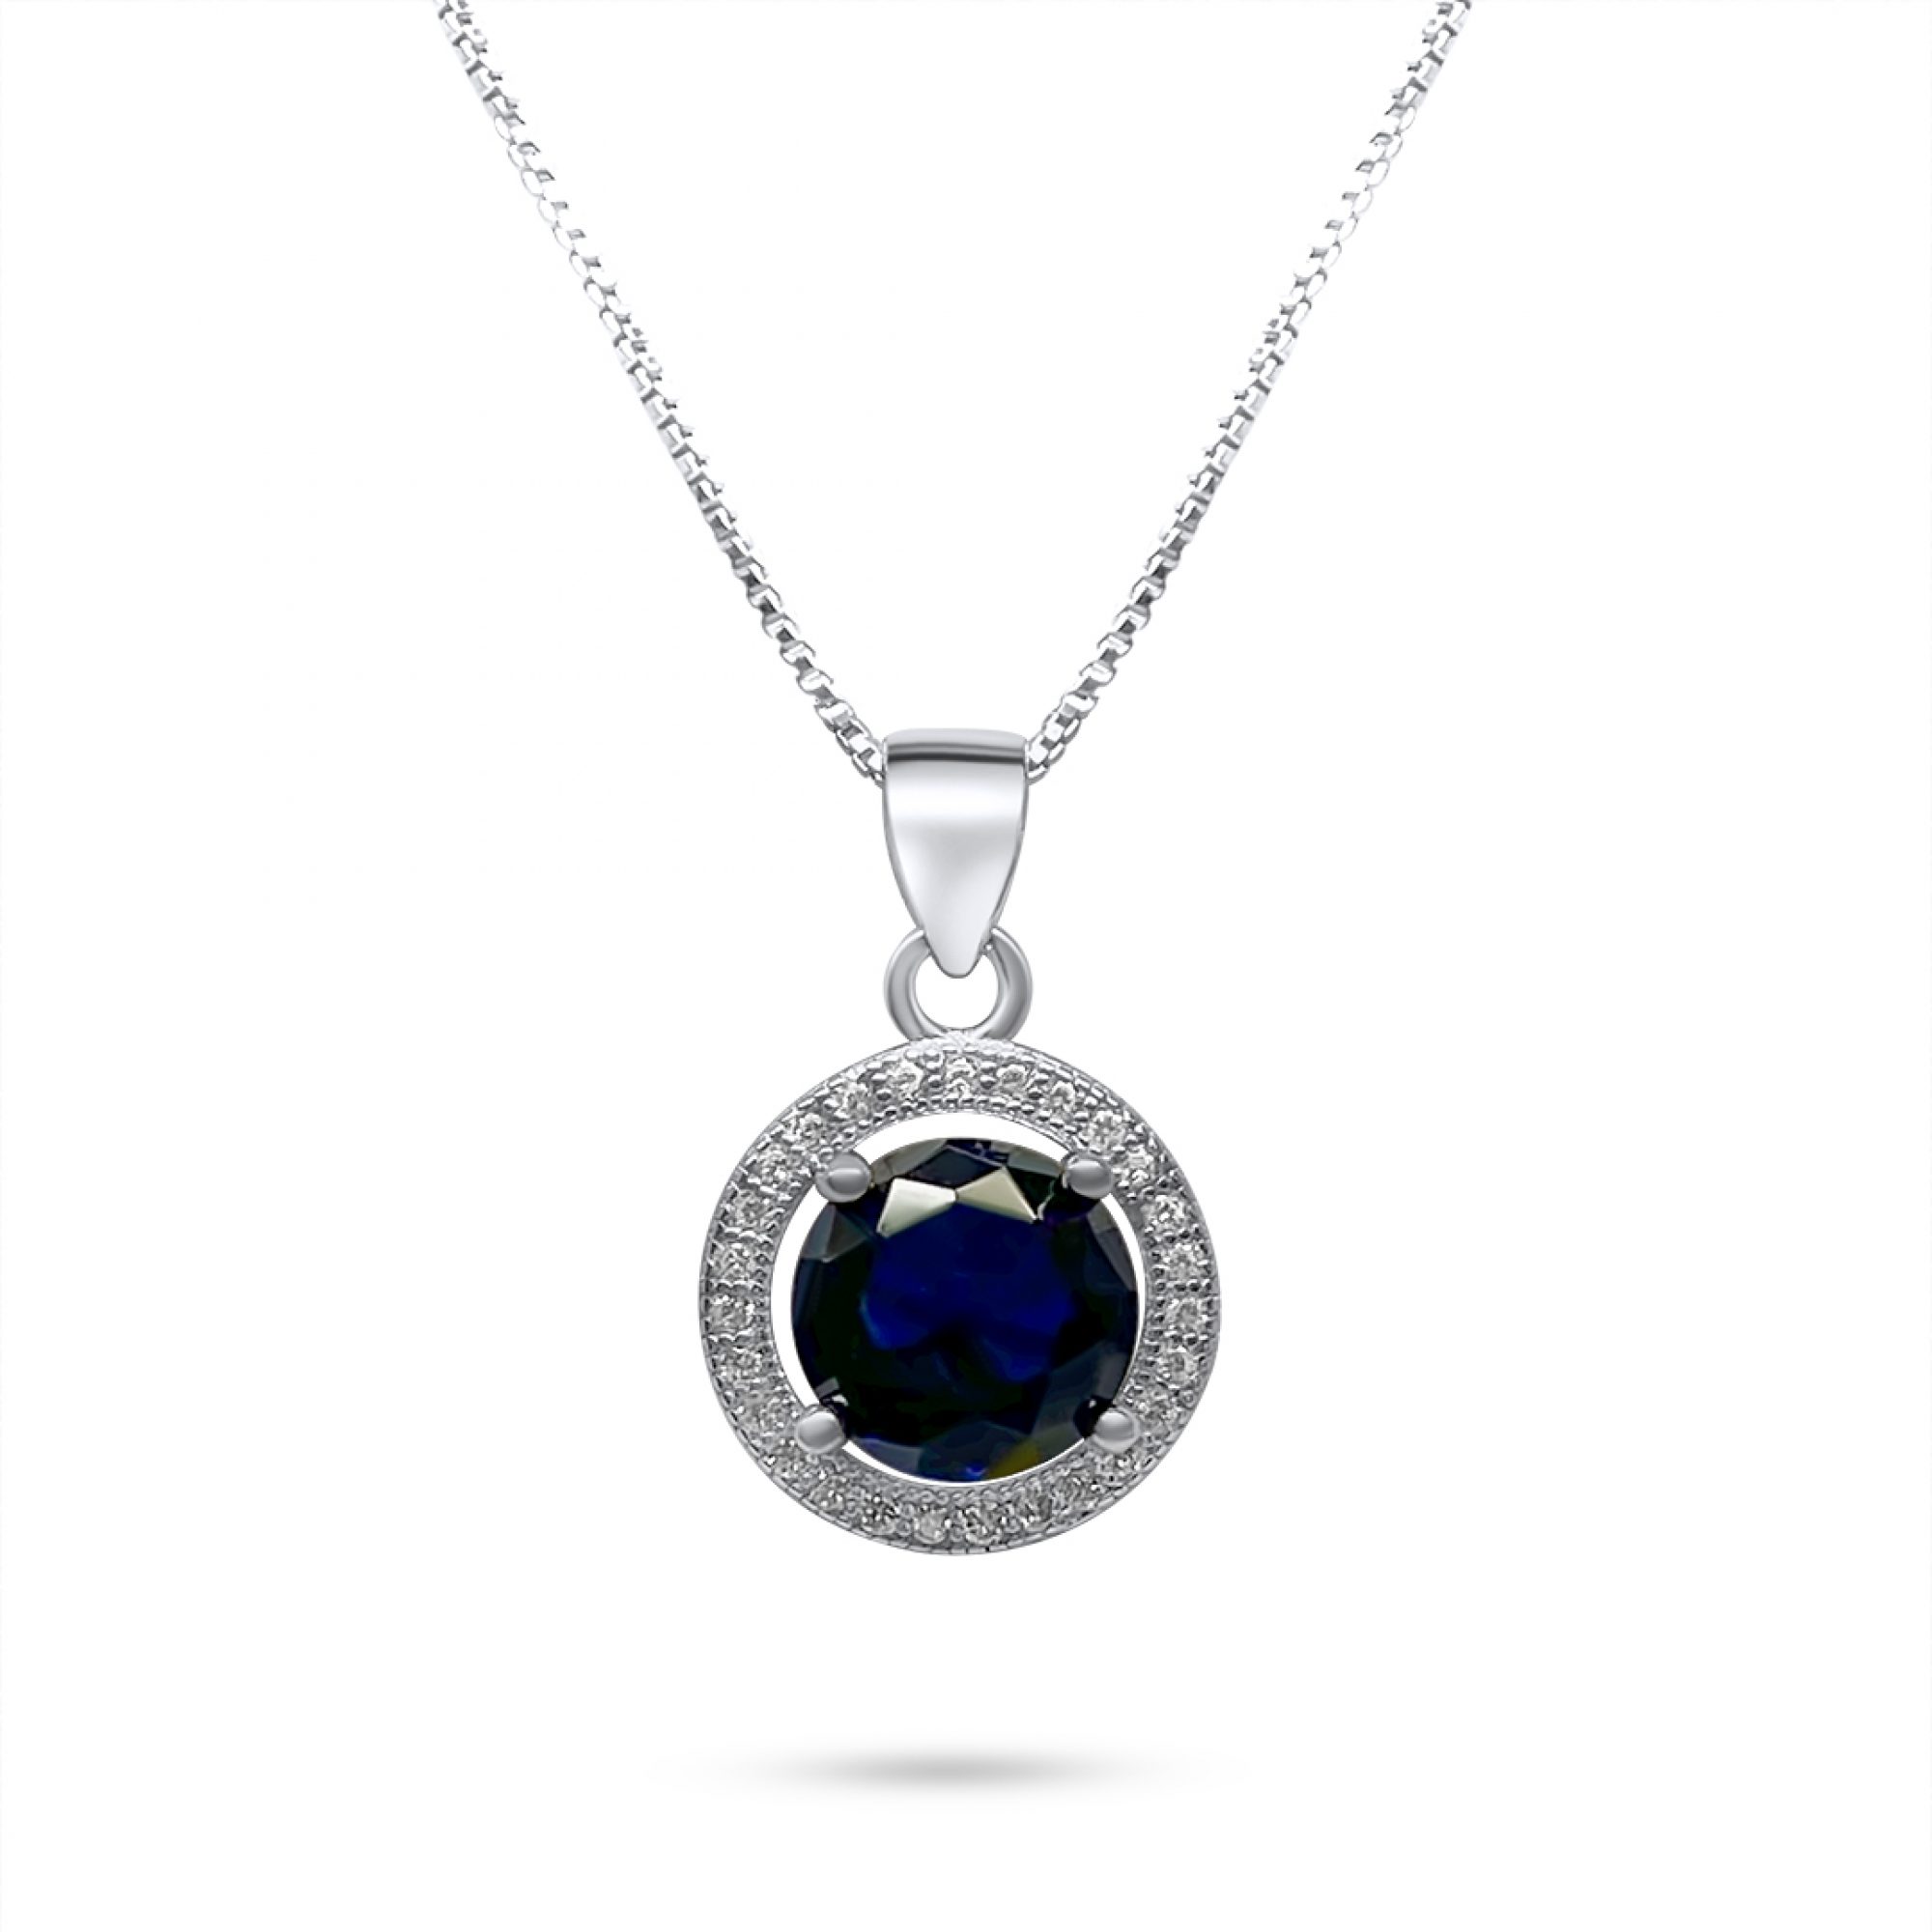 Necklace with sapphire and zircon stones